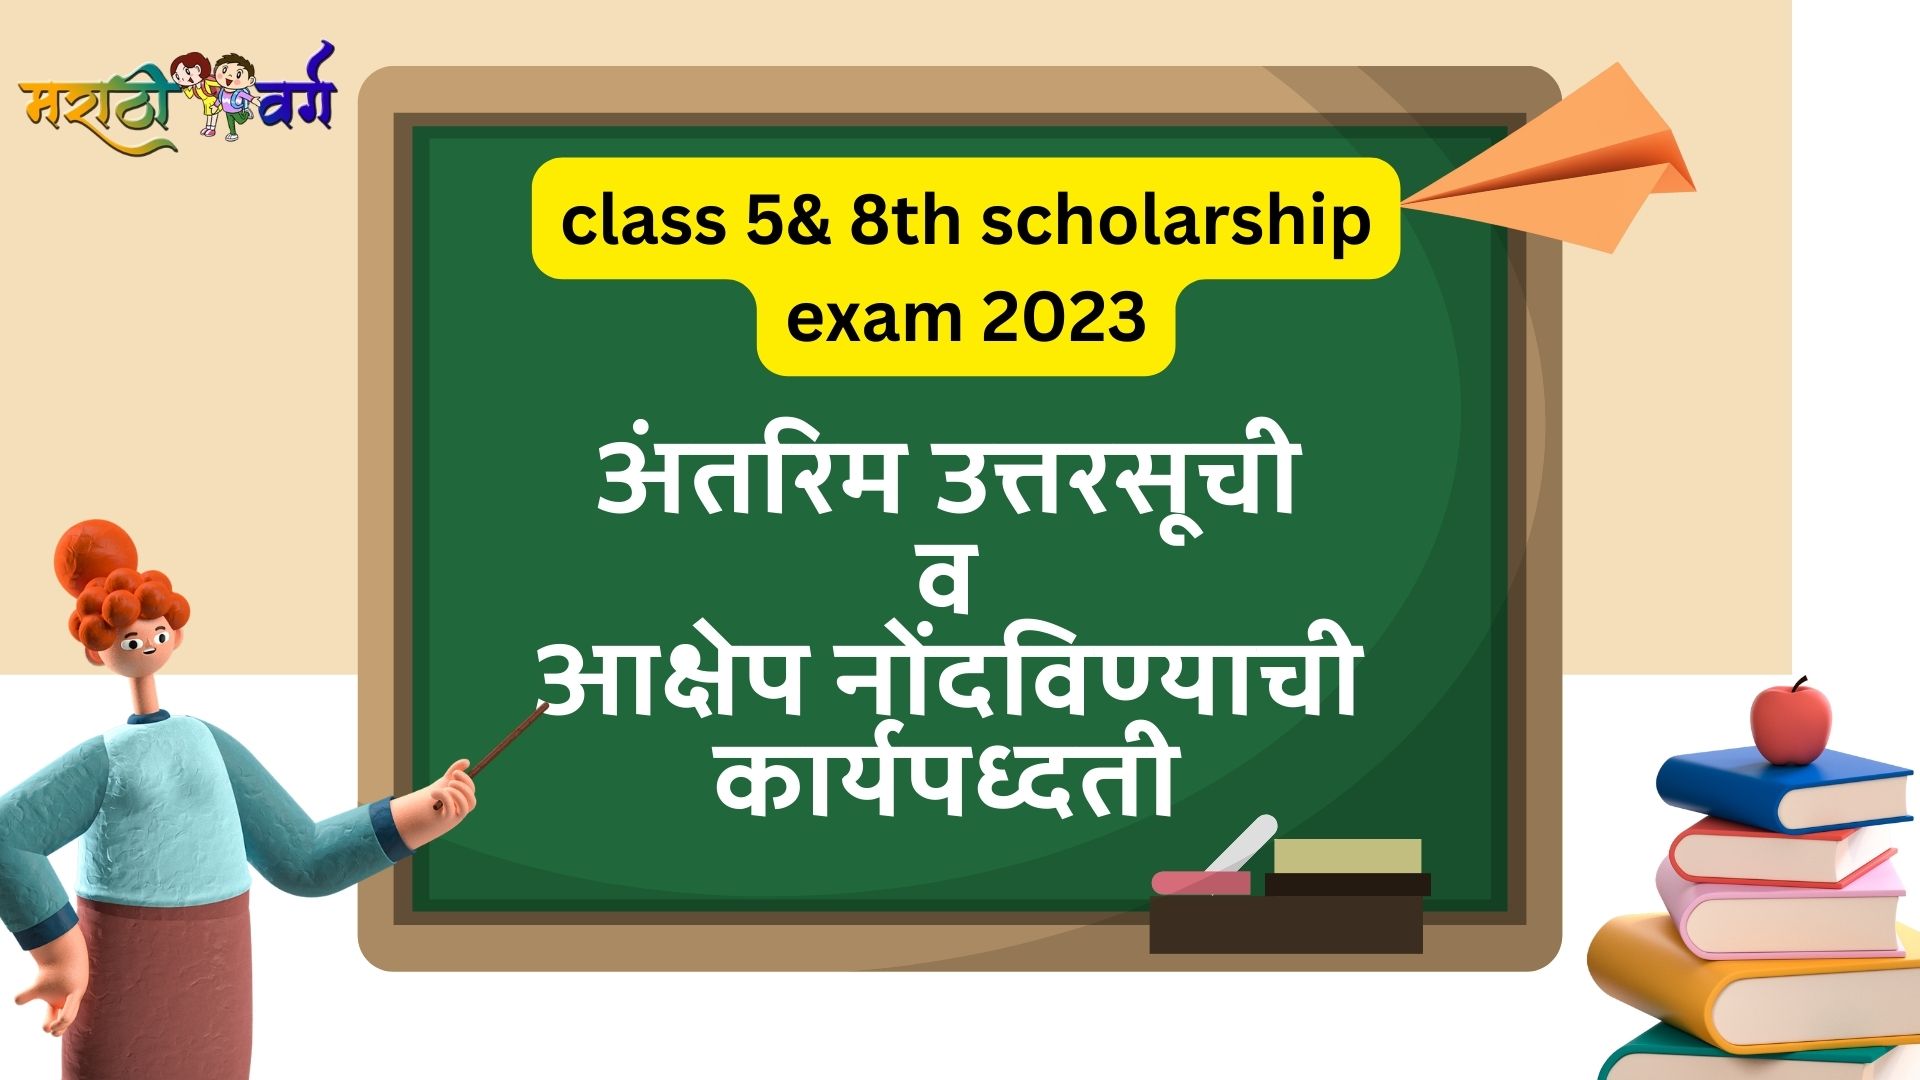 download interim answer key for 5th and 8th scholarship exam 2023 with objection procedure